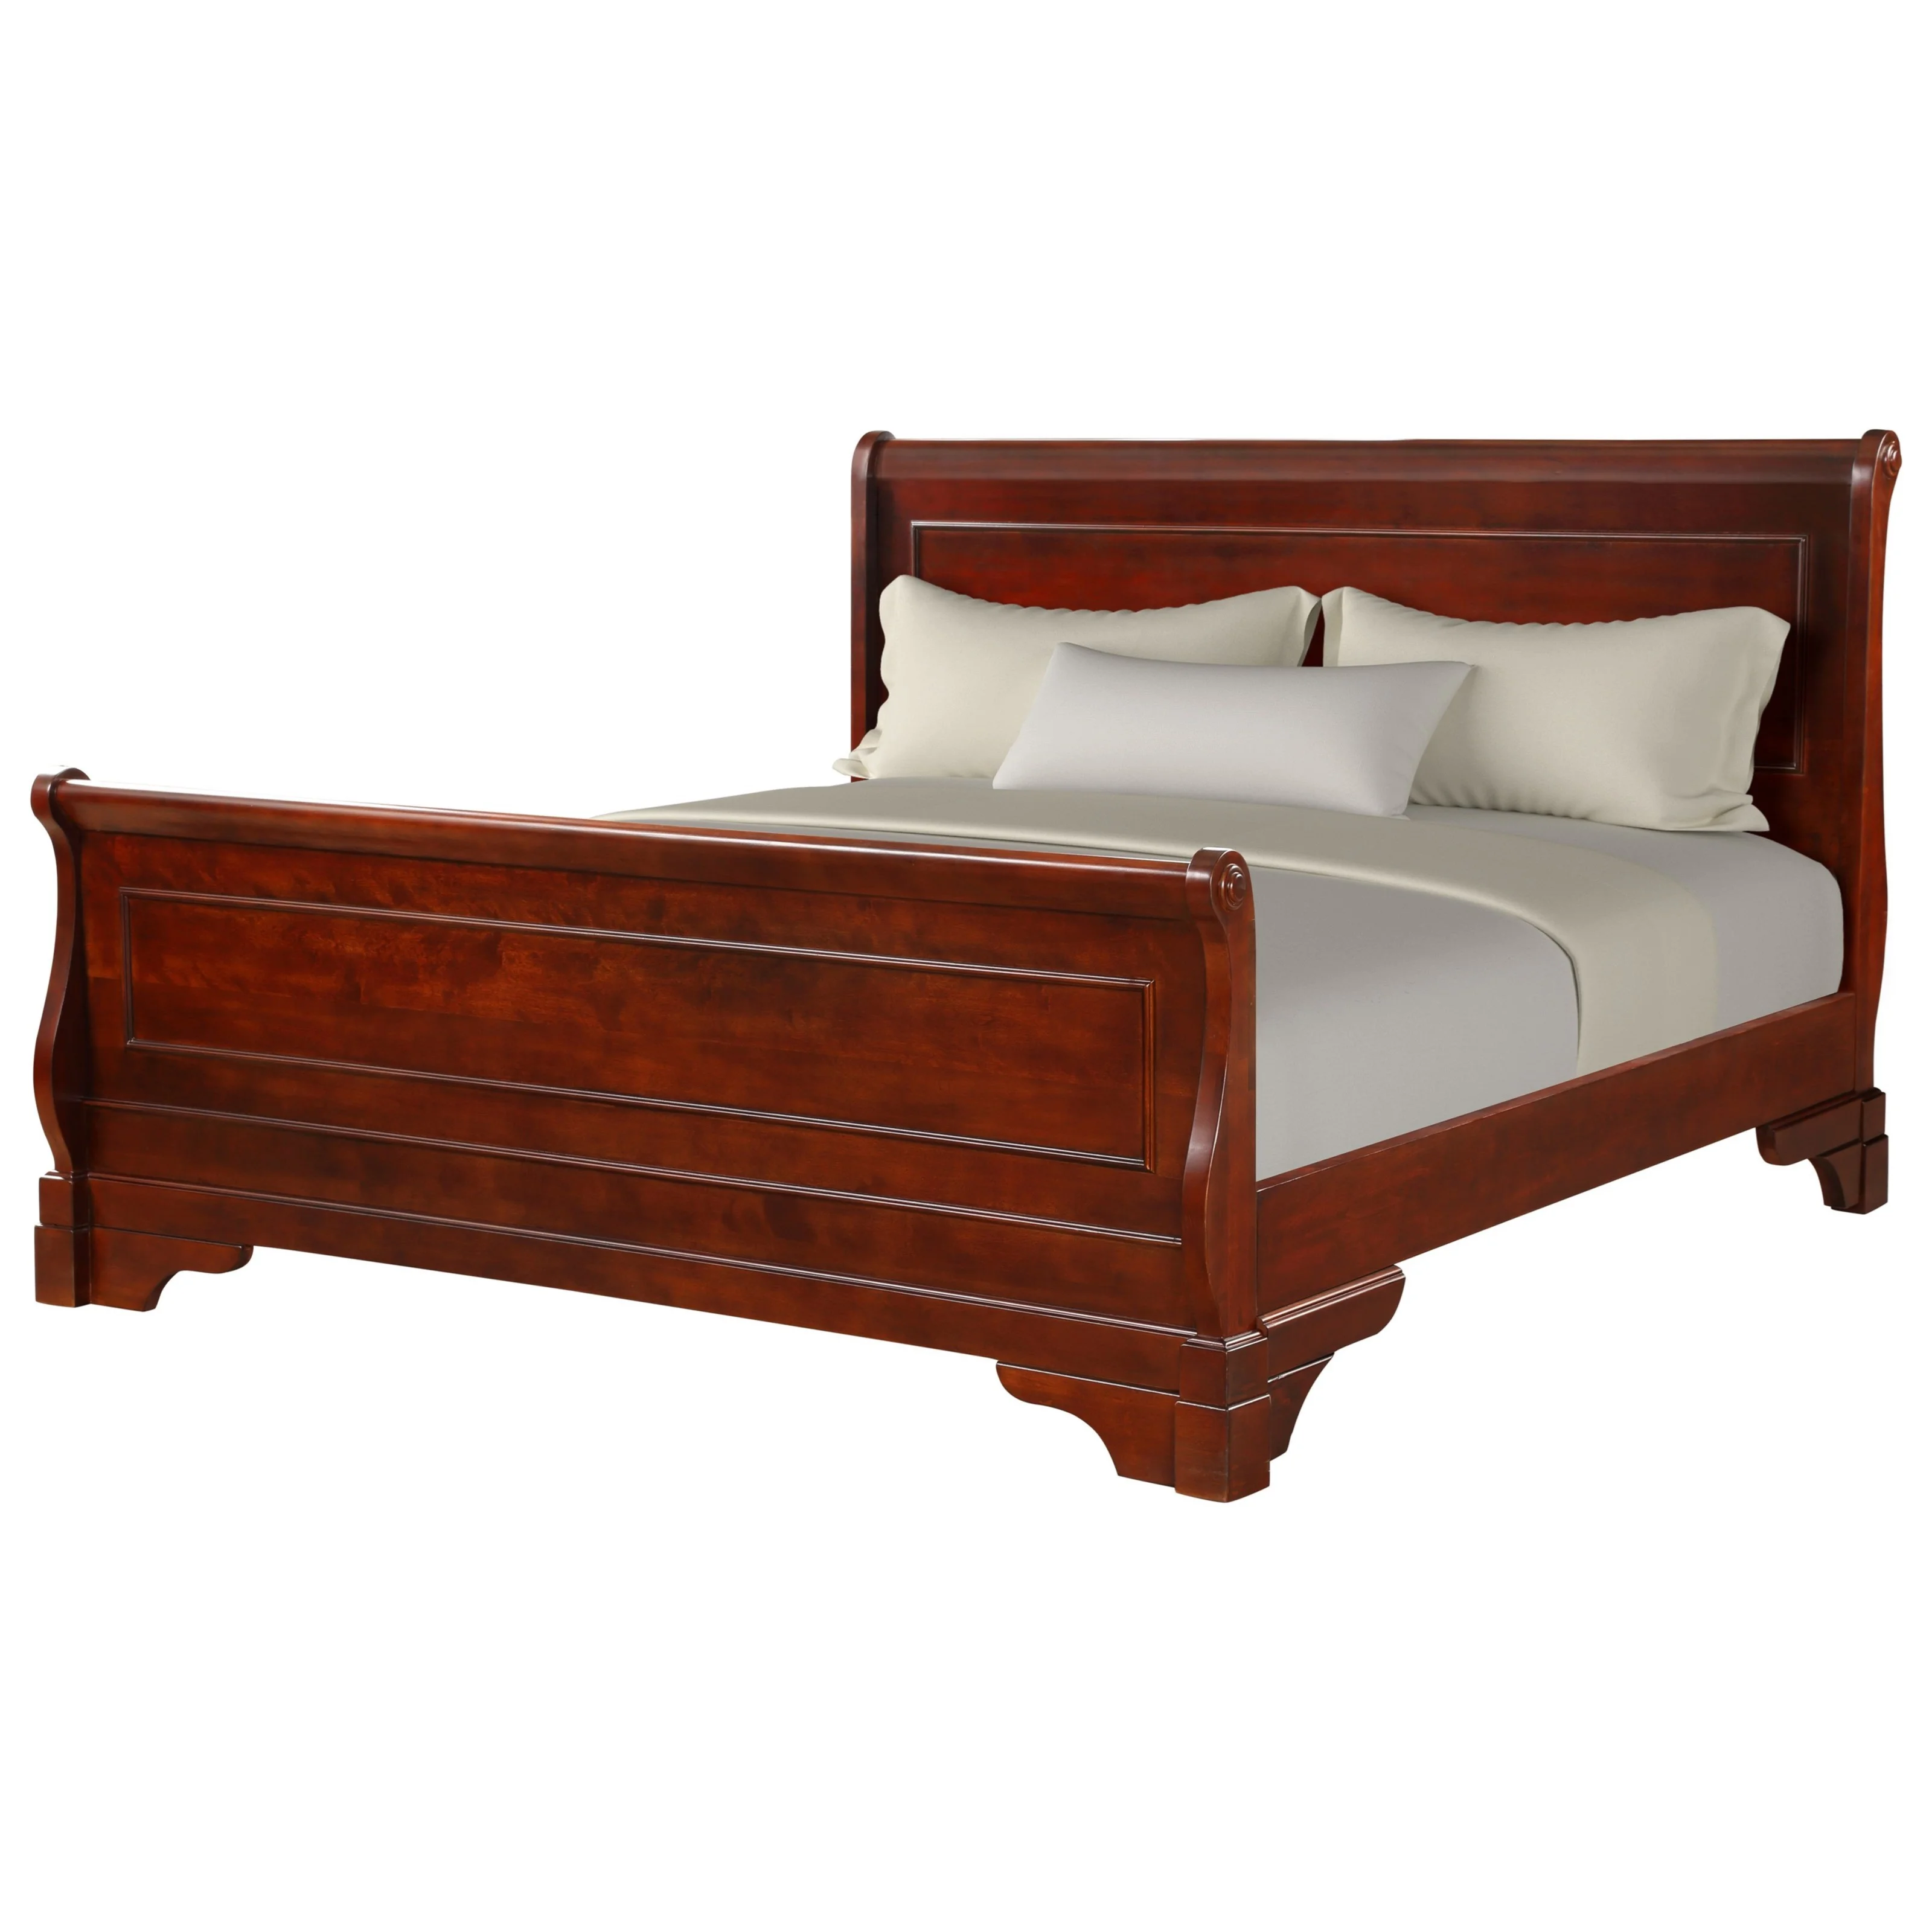 Louis Philip Cherry Sleigh Bed with Headboard, Footboard, and Rails